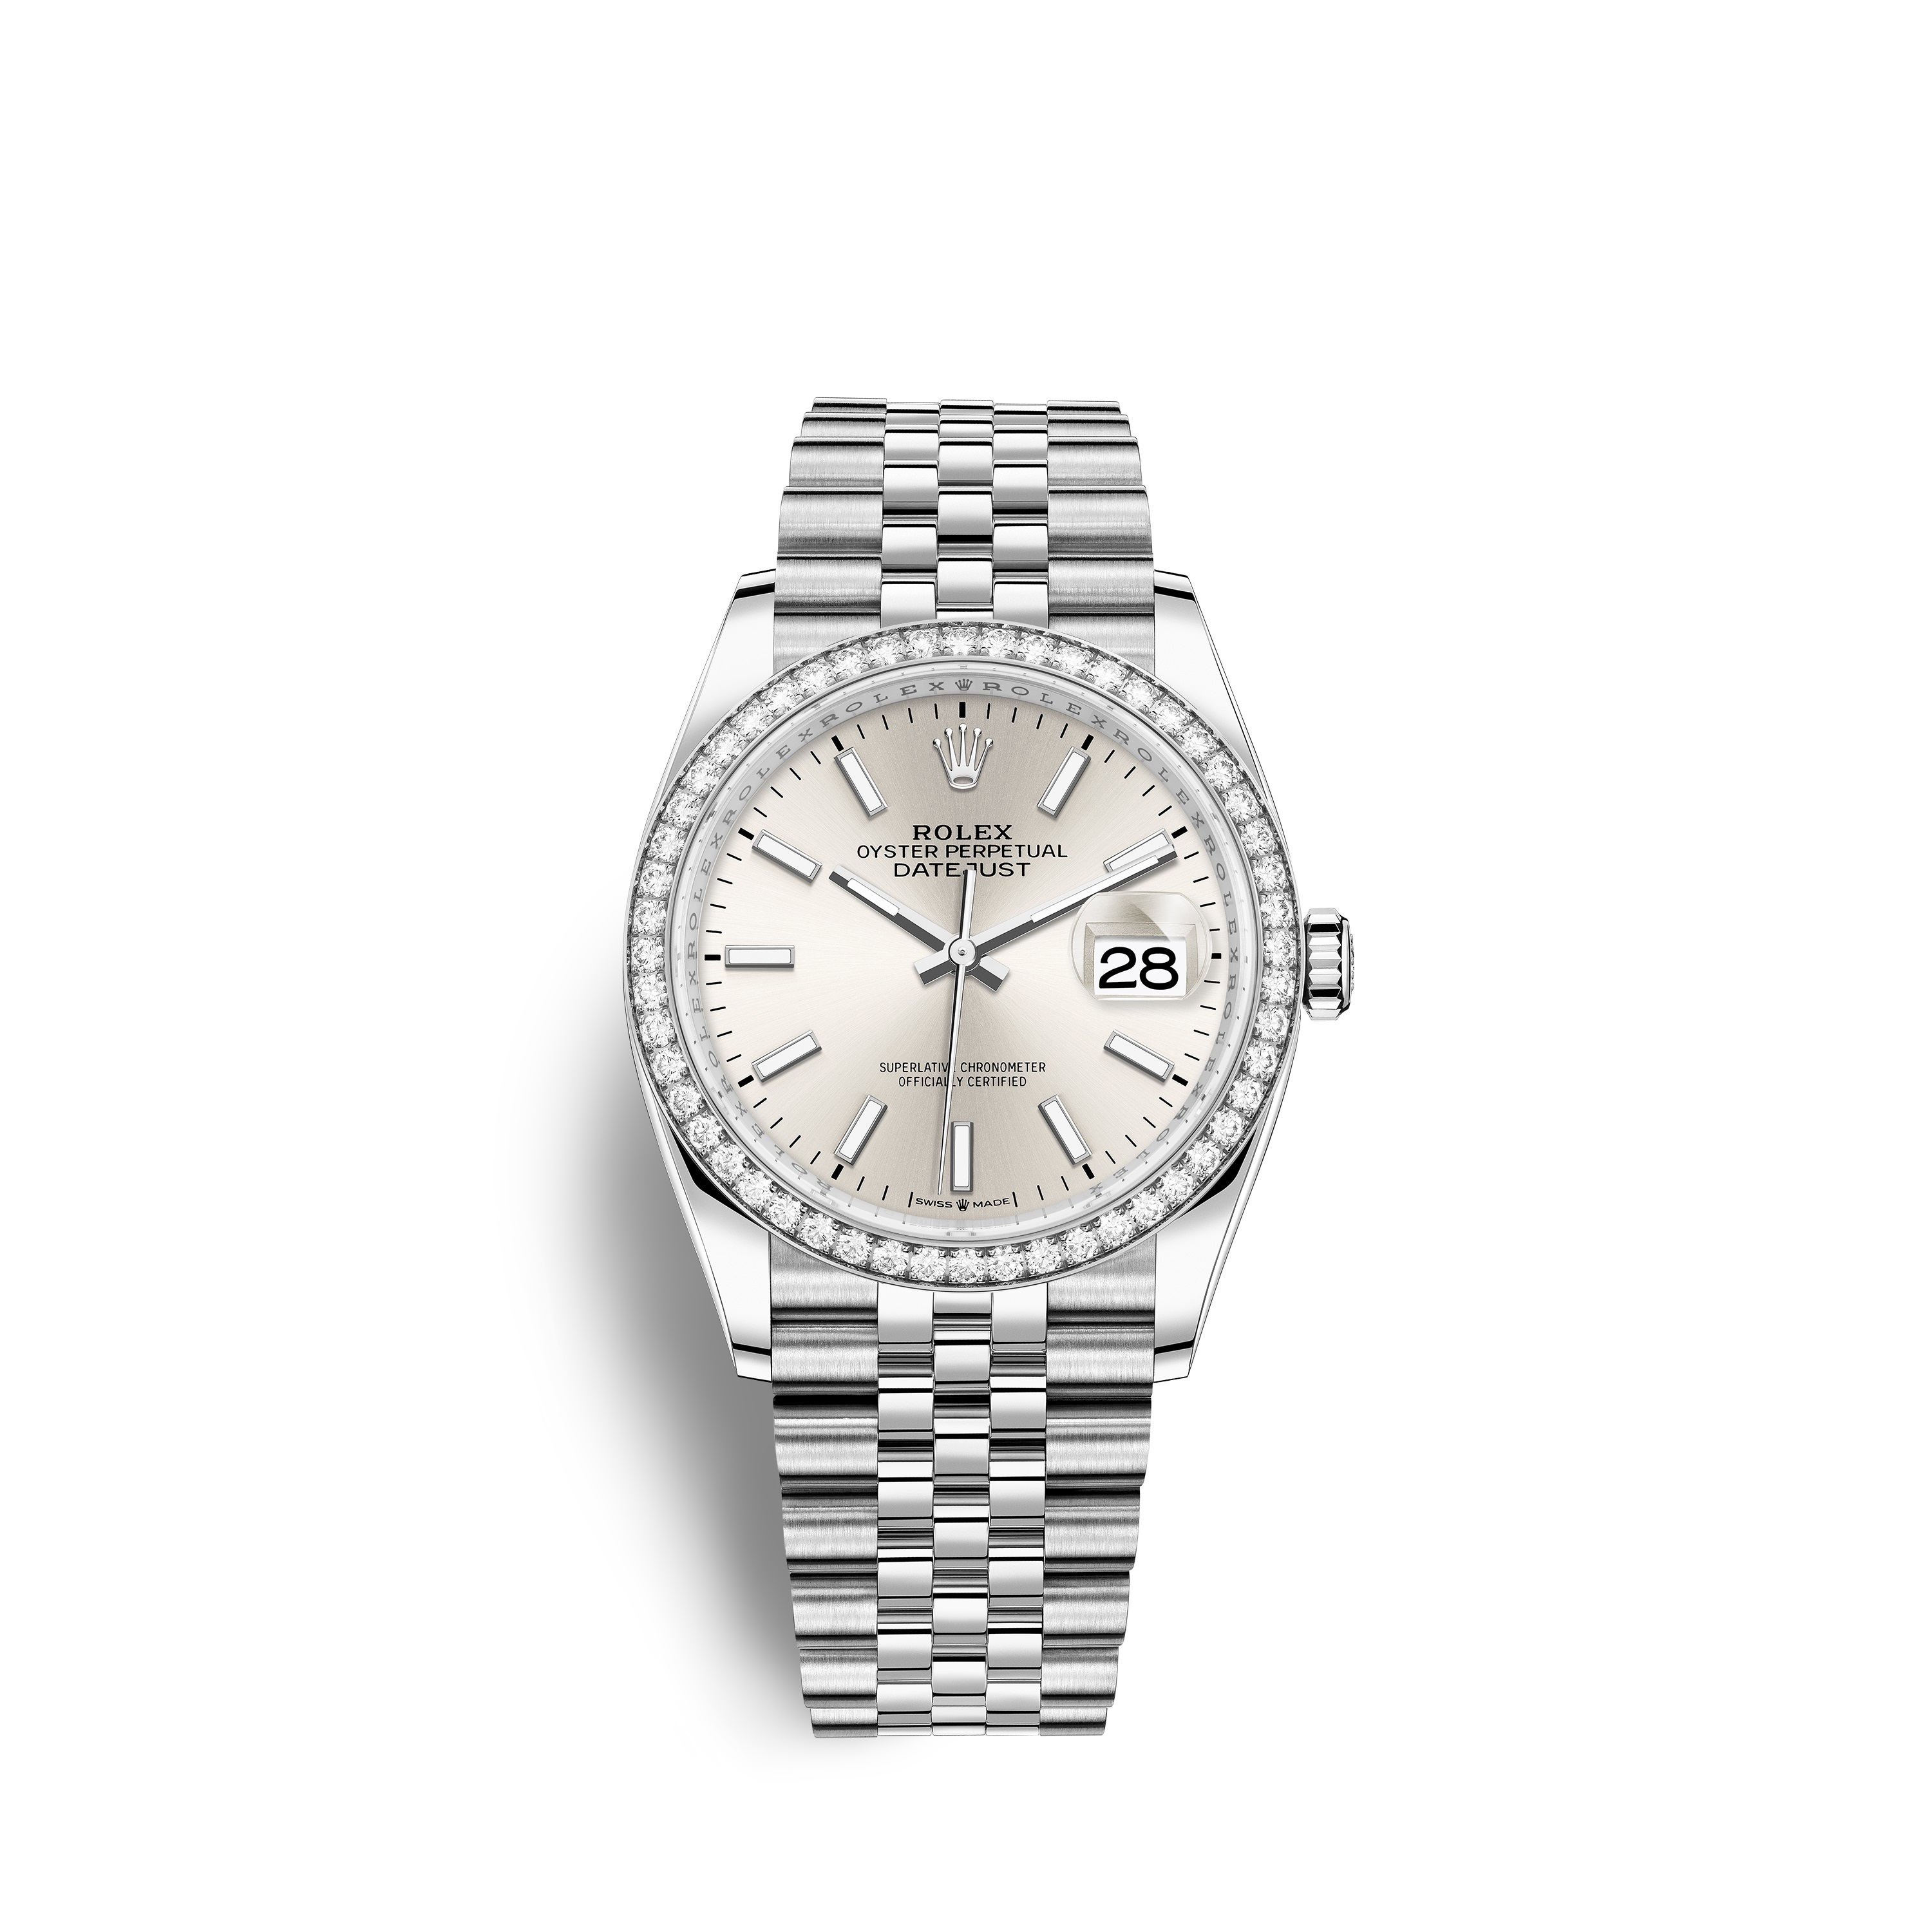 Datejust 36 126284RBR White Gold, Stainless Steel & Diamonds Watch (Silver)